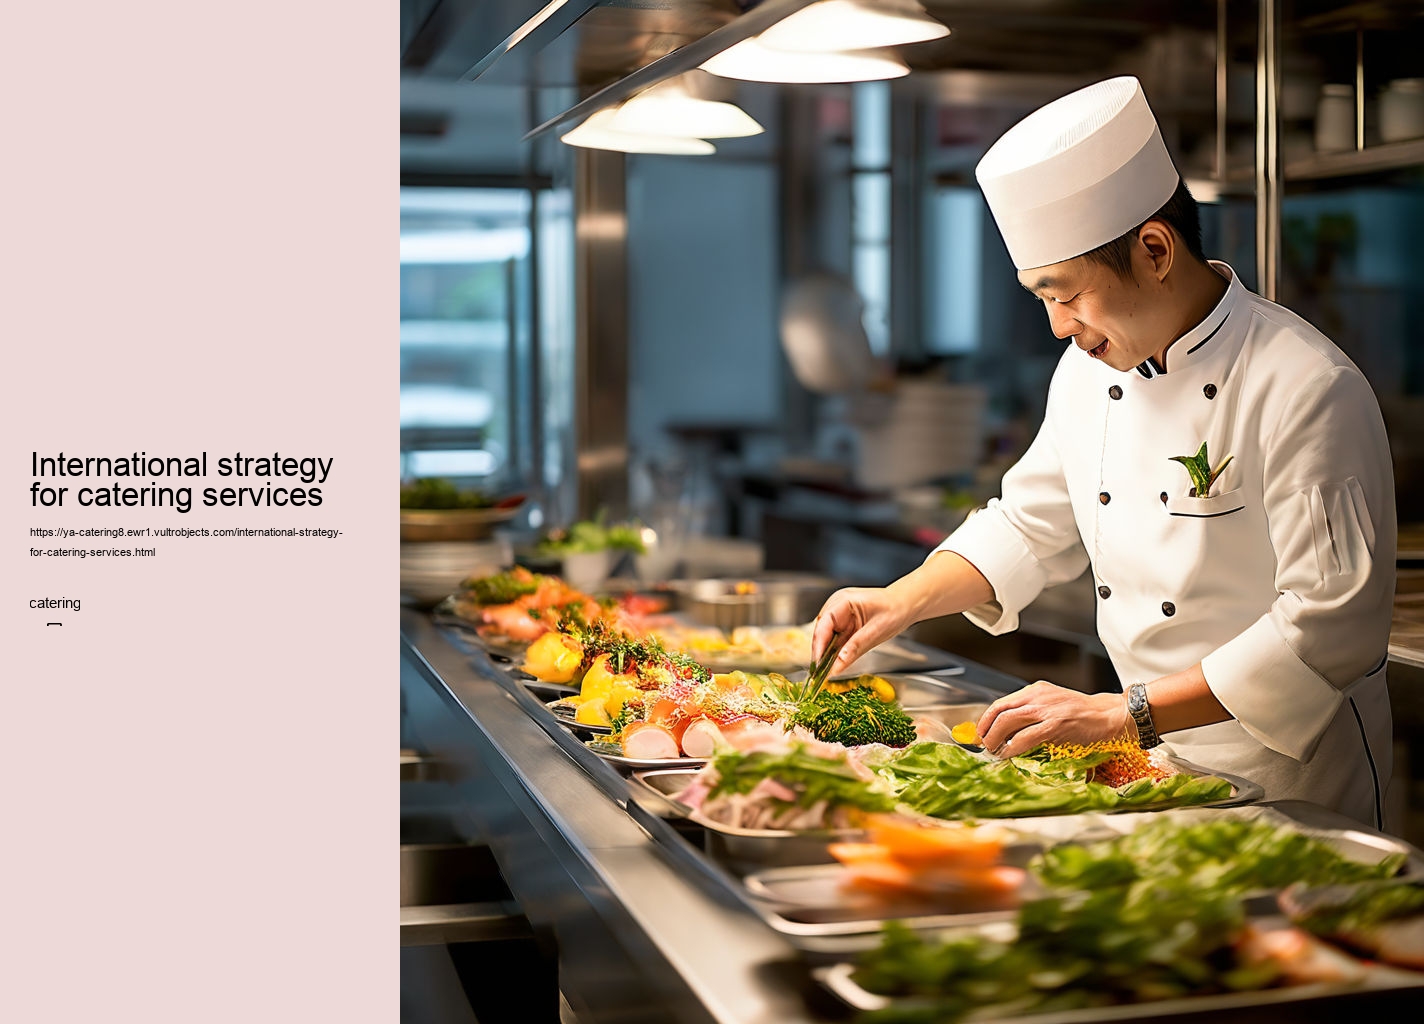 International strategy for catering services